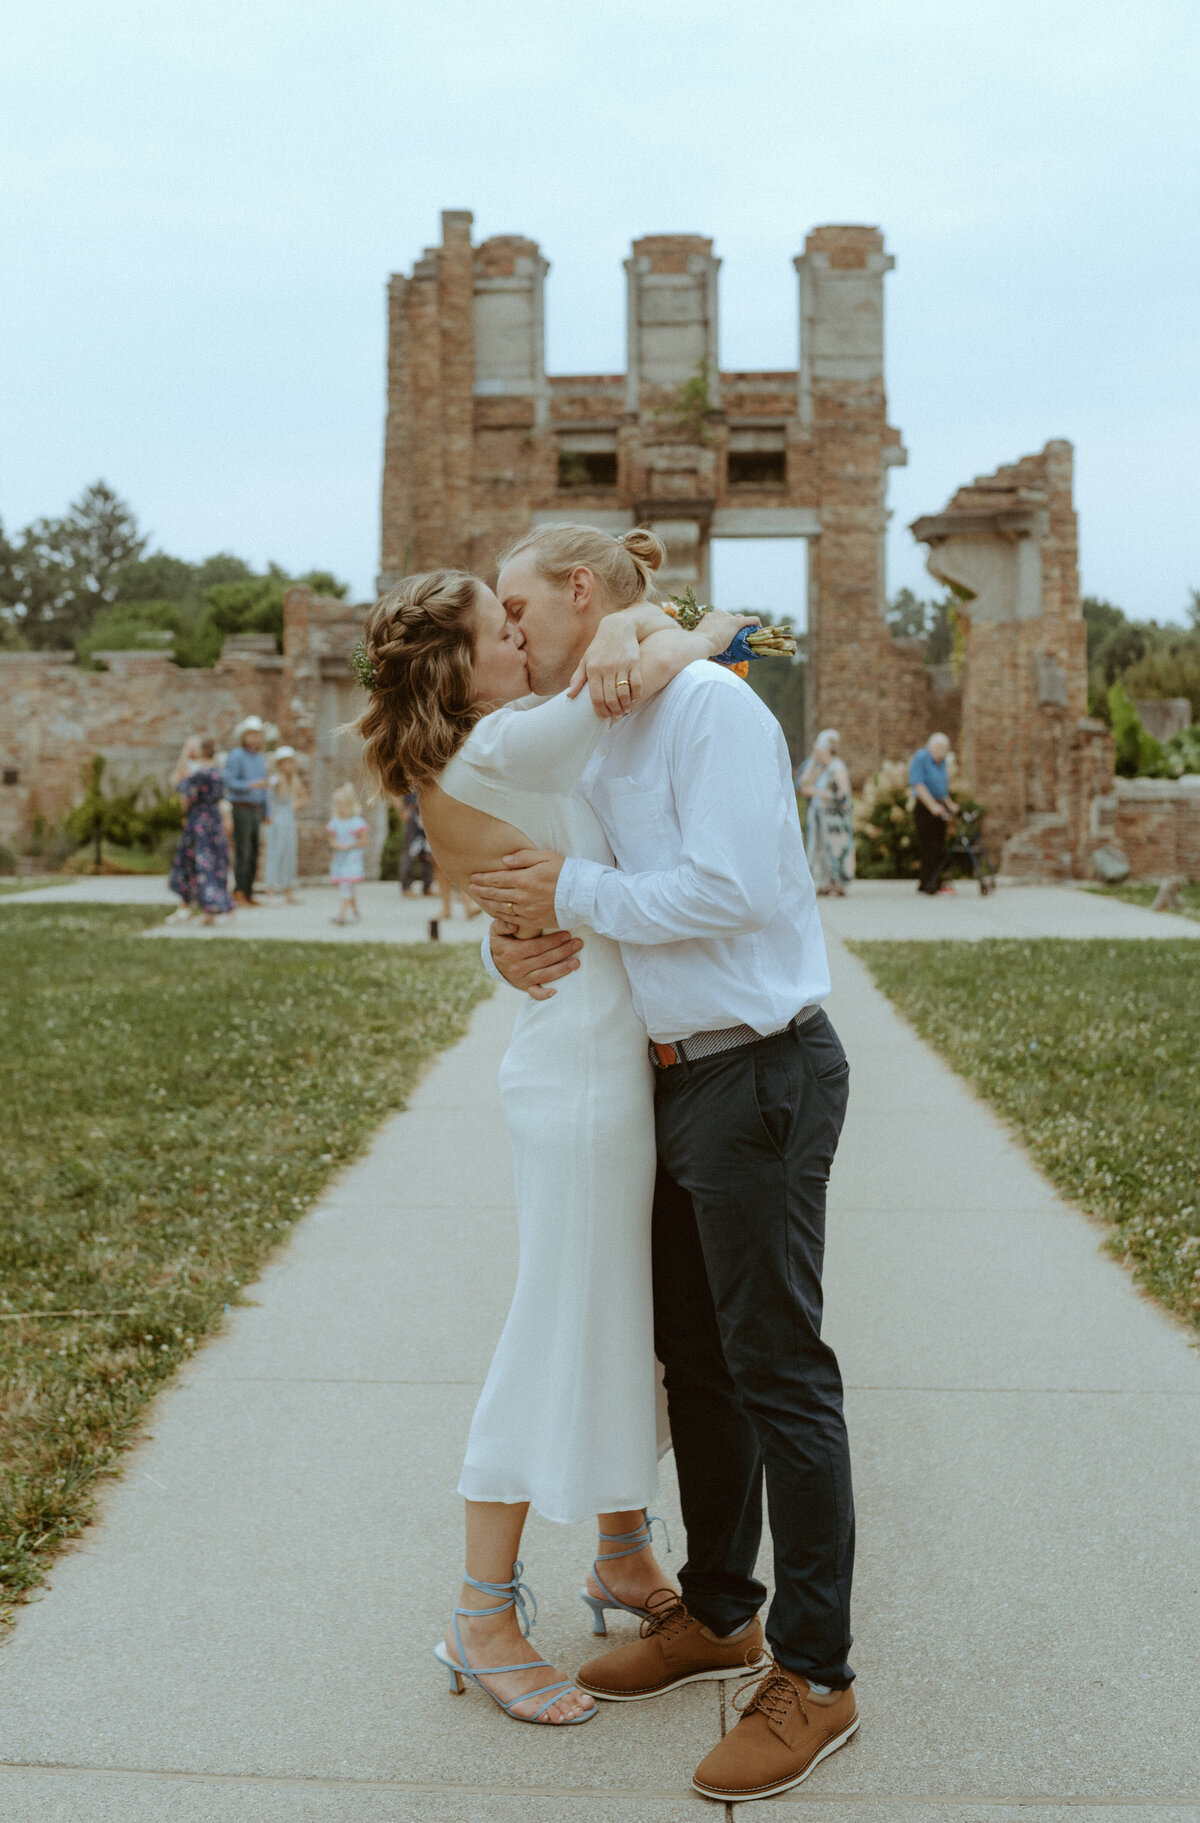 JustJessPhotography_Indianapolis Photographer_Brittany&Hank Holliday Park elopement376